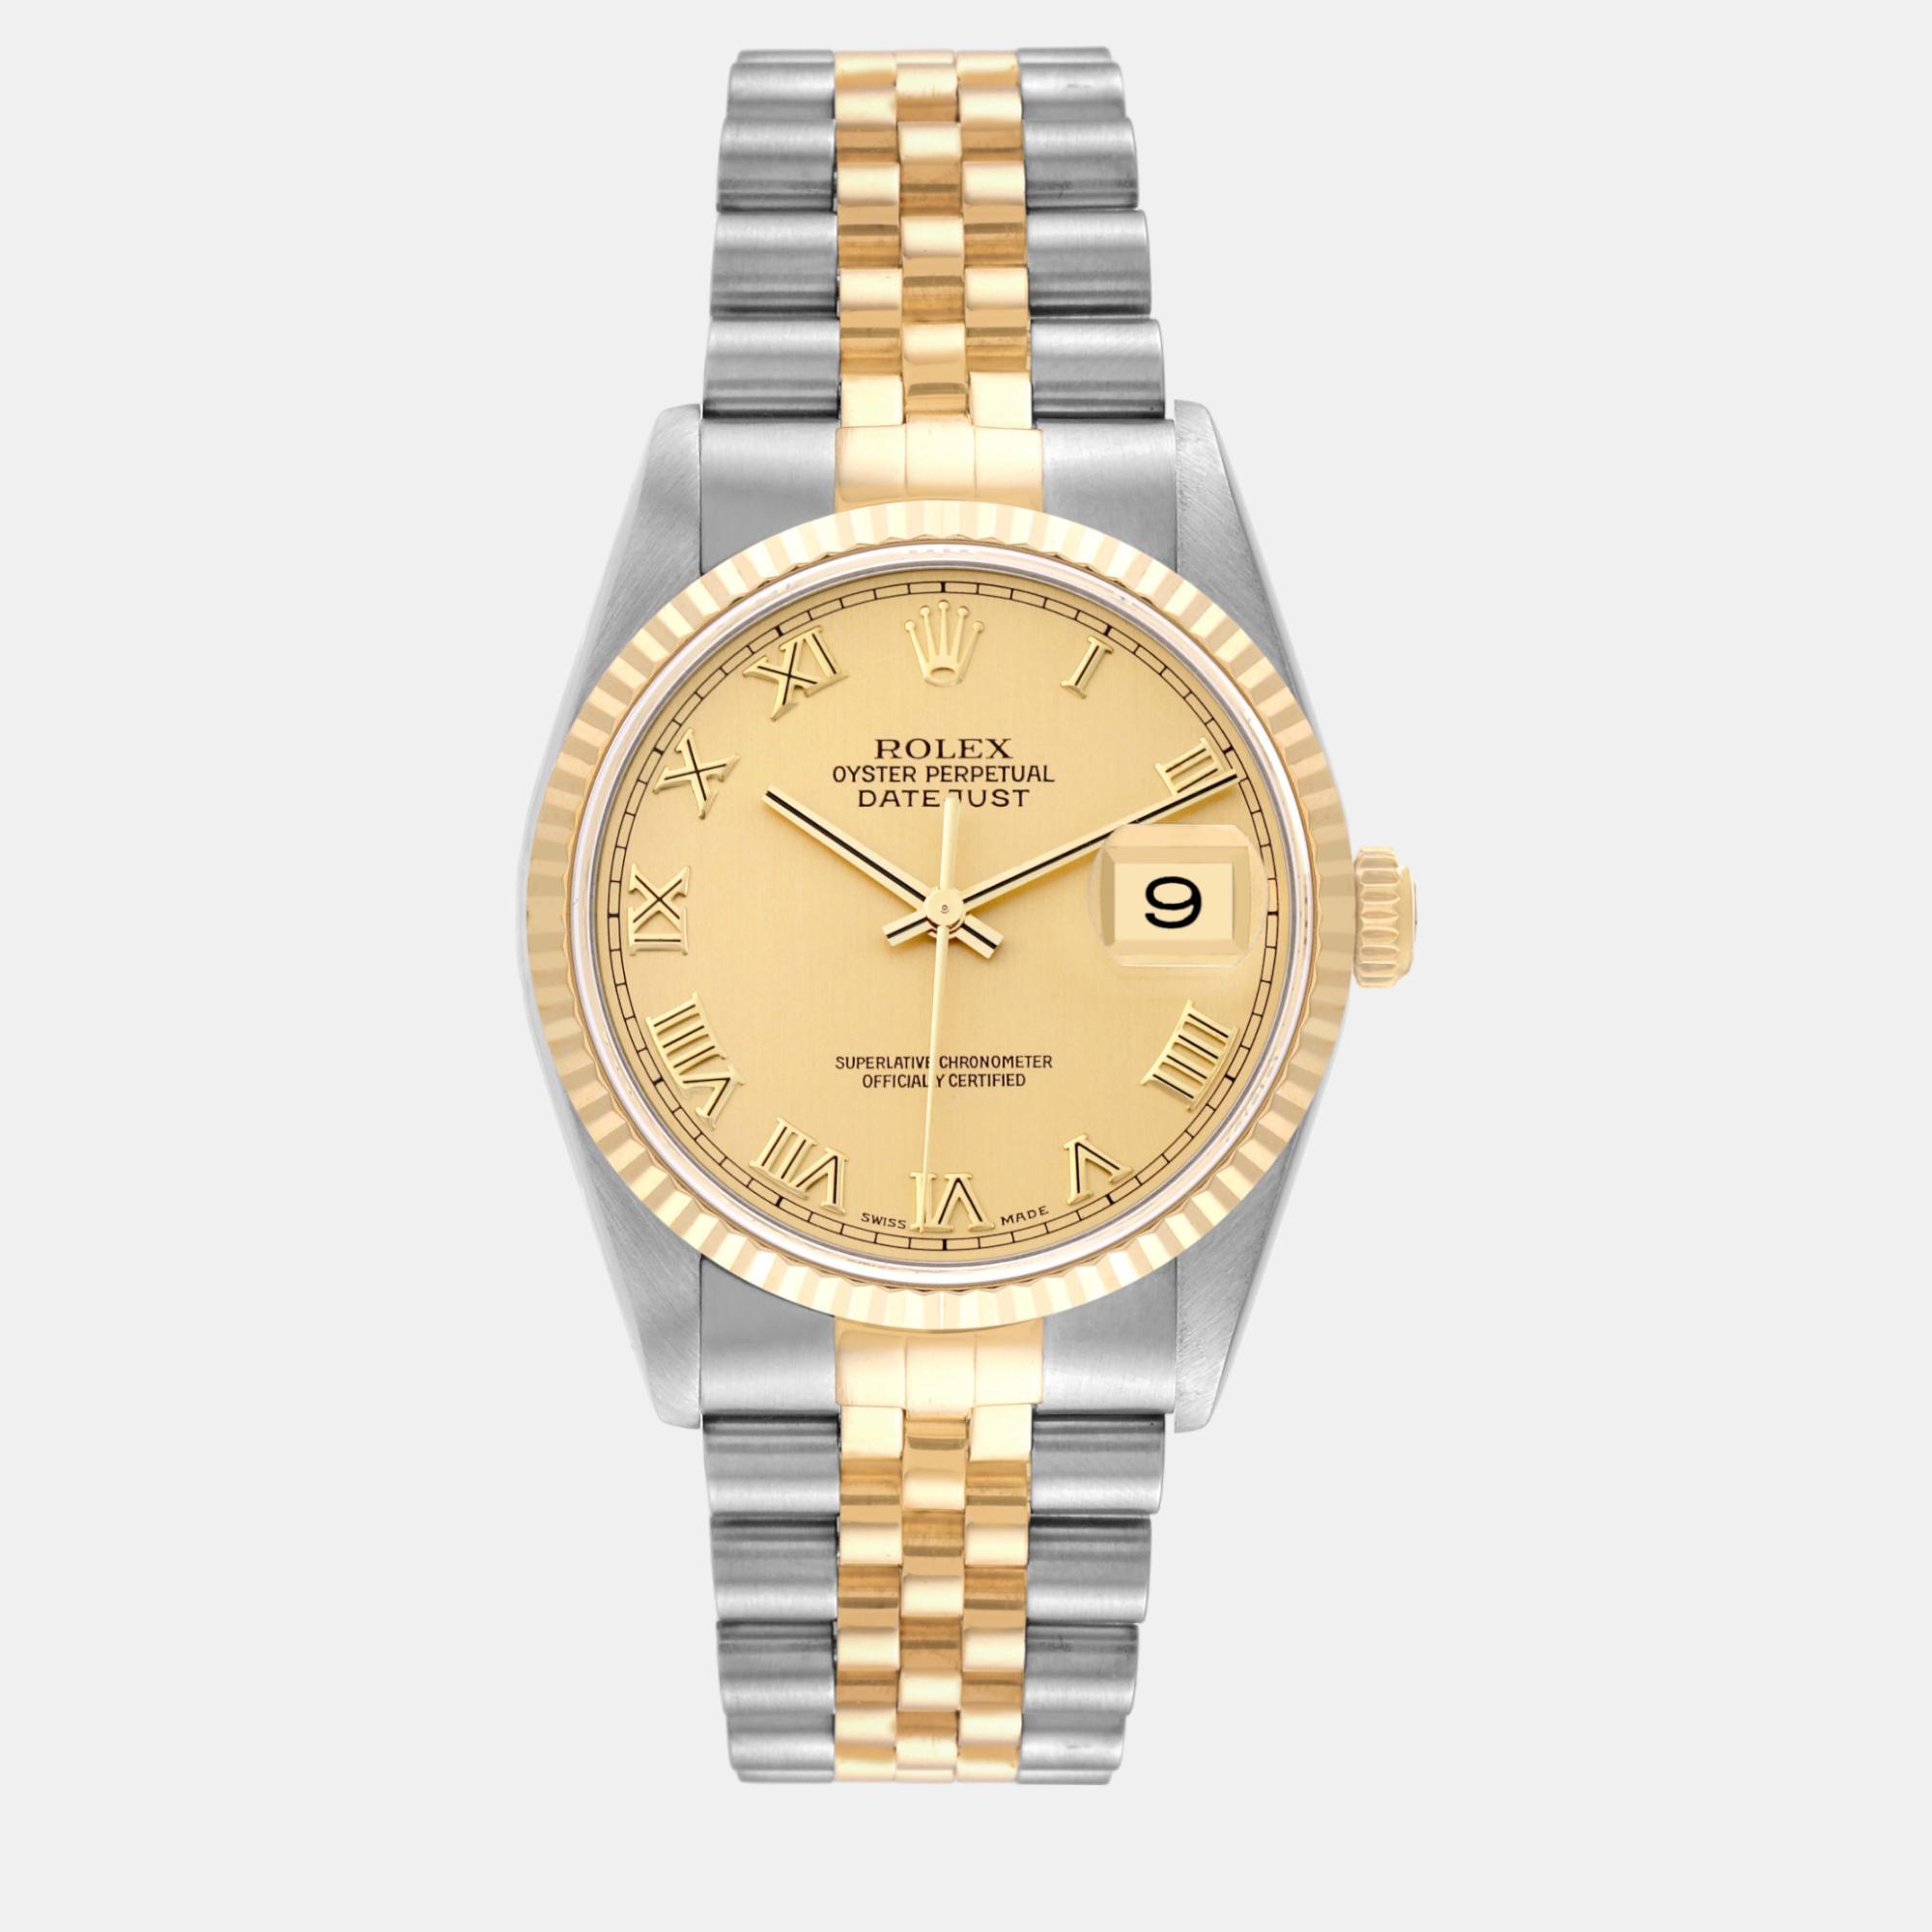 Rolex datejust steel yellow gold champagne dial men's watch 36.0 mm